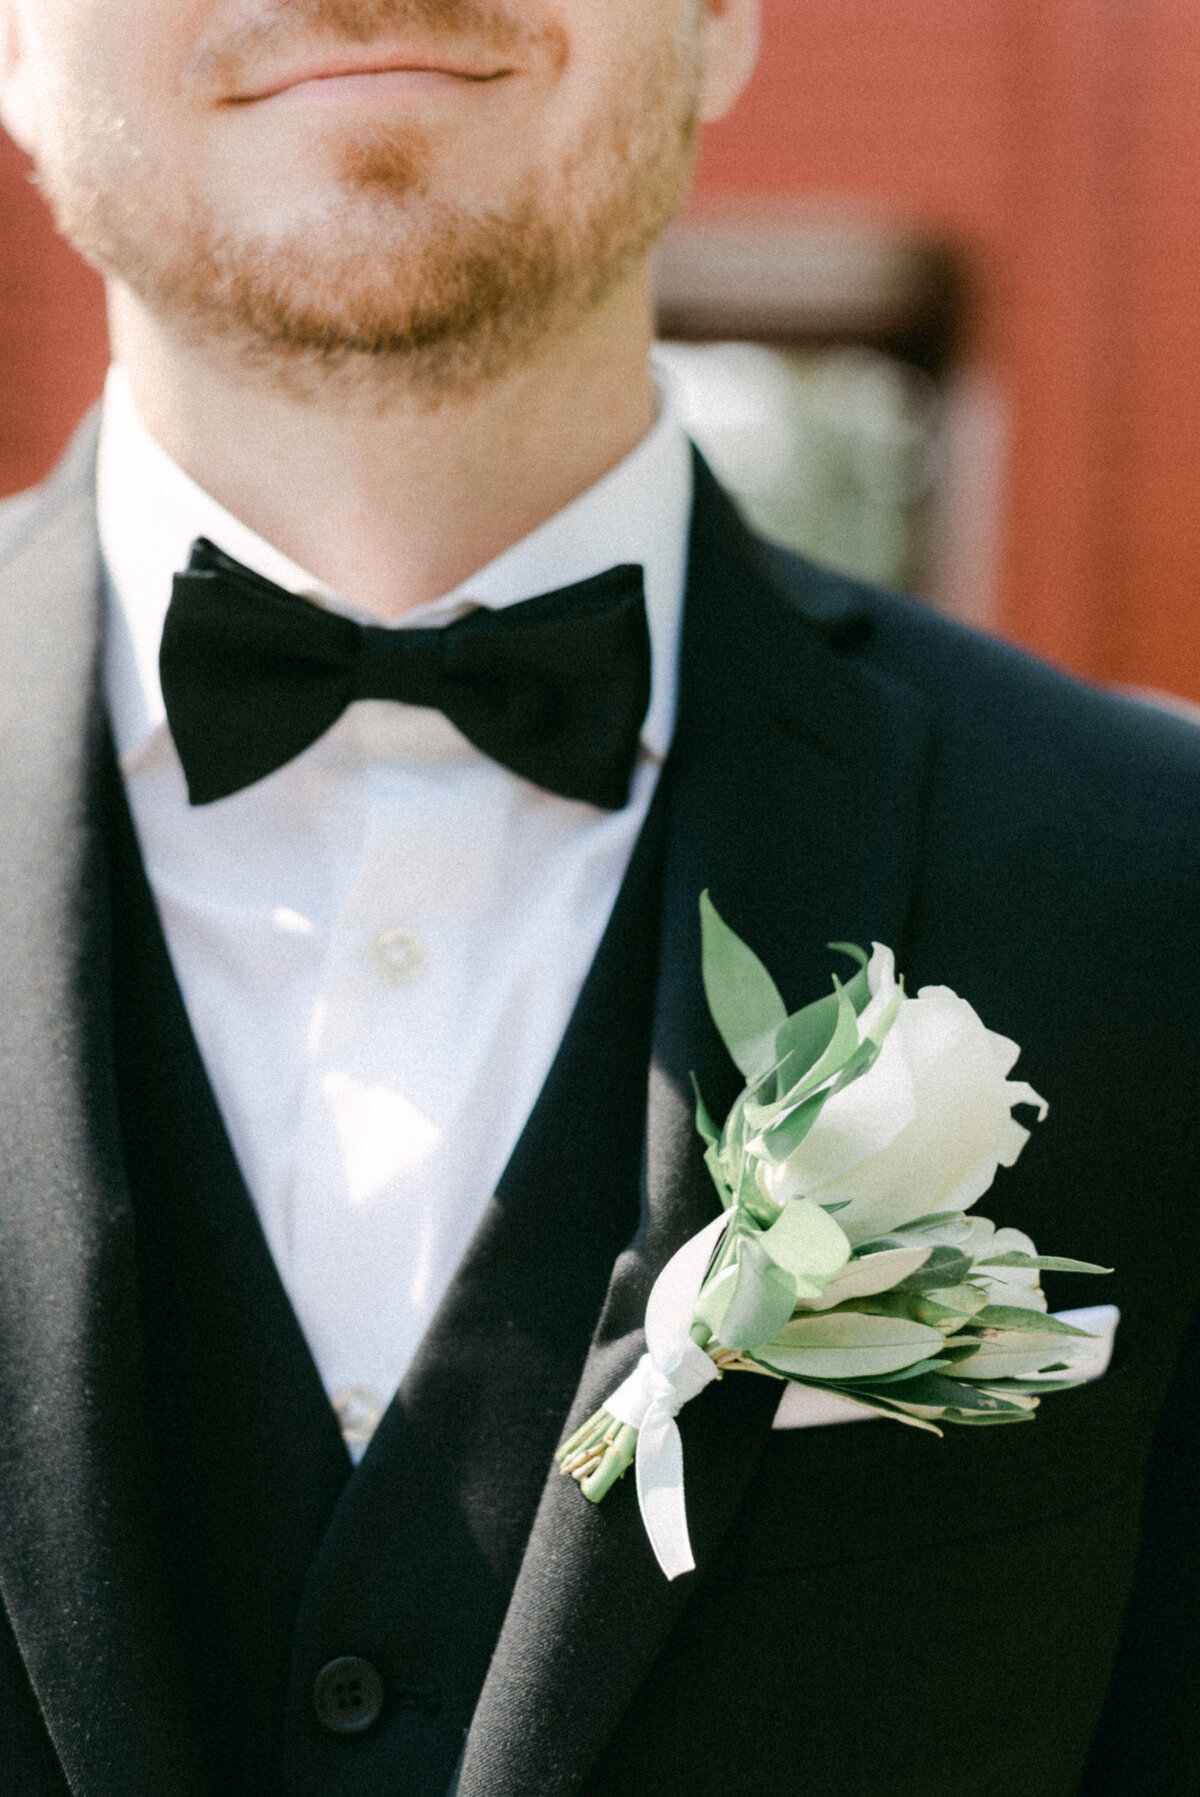 The boutonnier photographed by wedding photographer Hannika Gabrielsson.